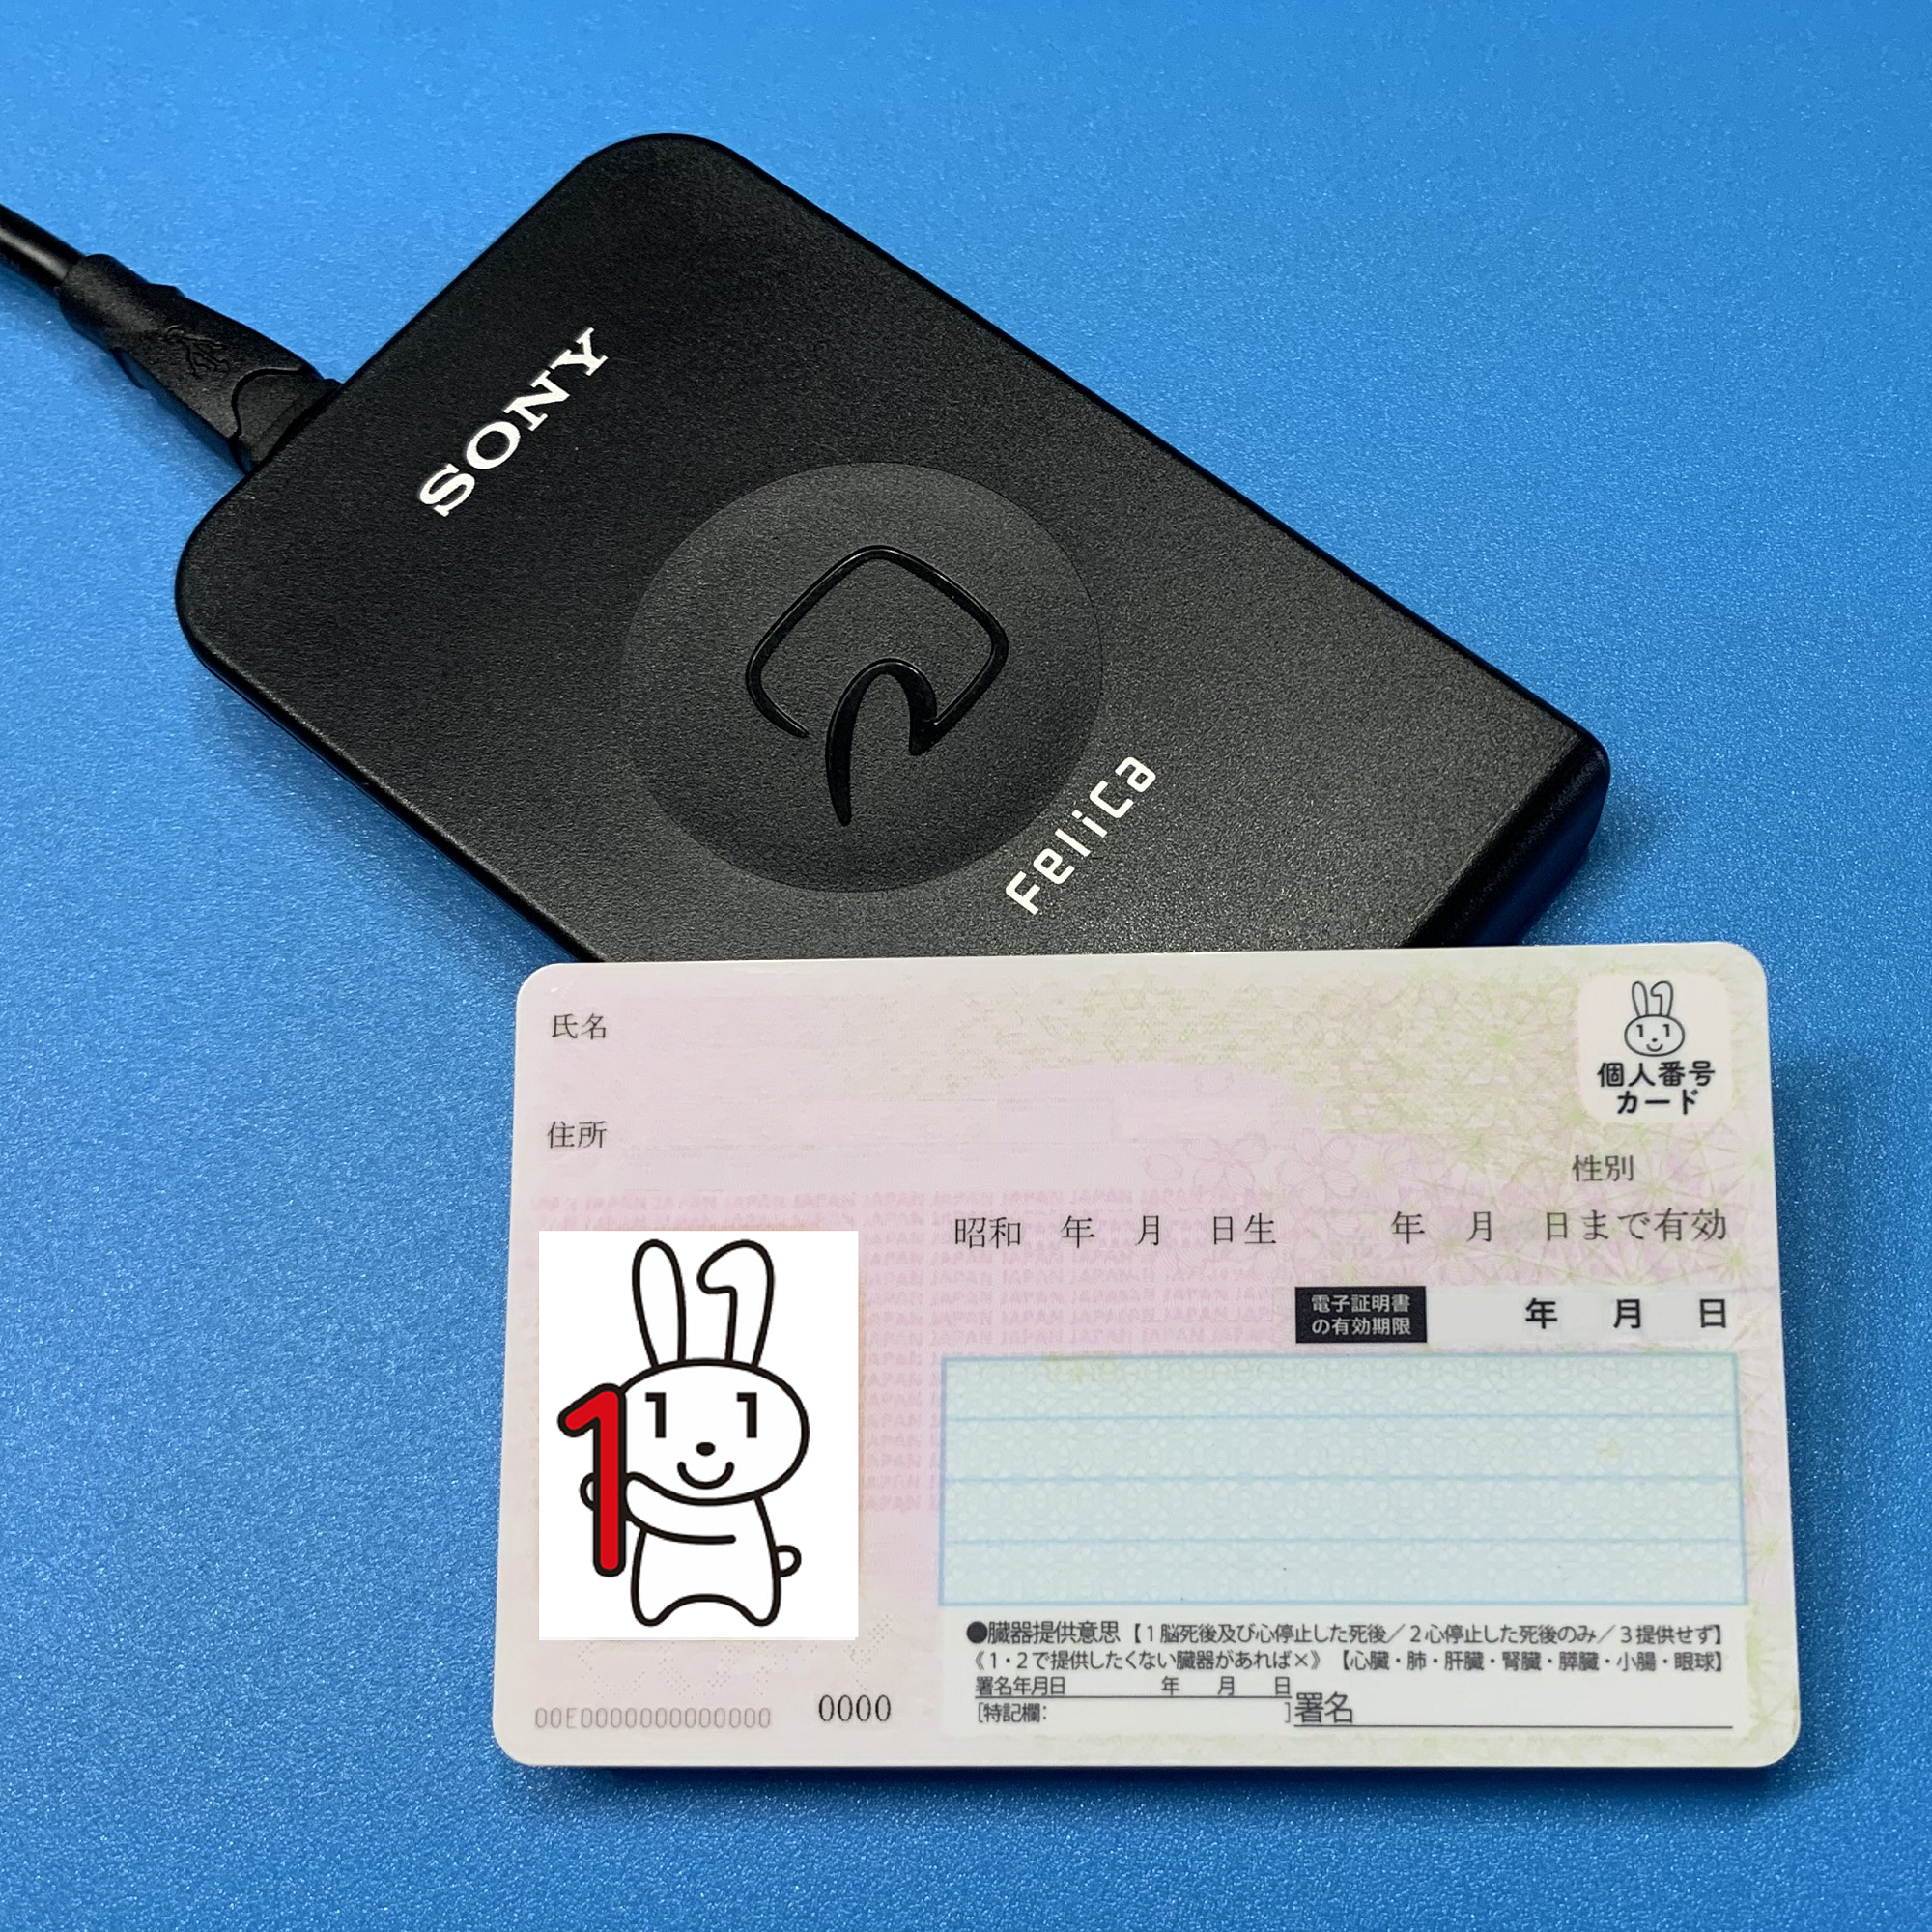 File:Contactless Ic Card Reader Writer RC-S370.jpg